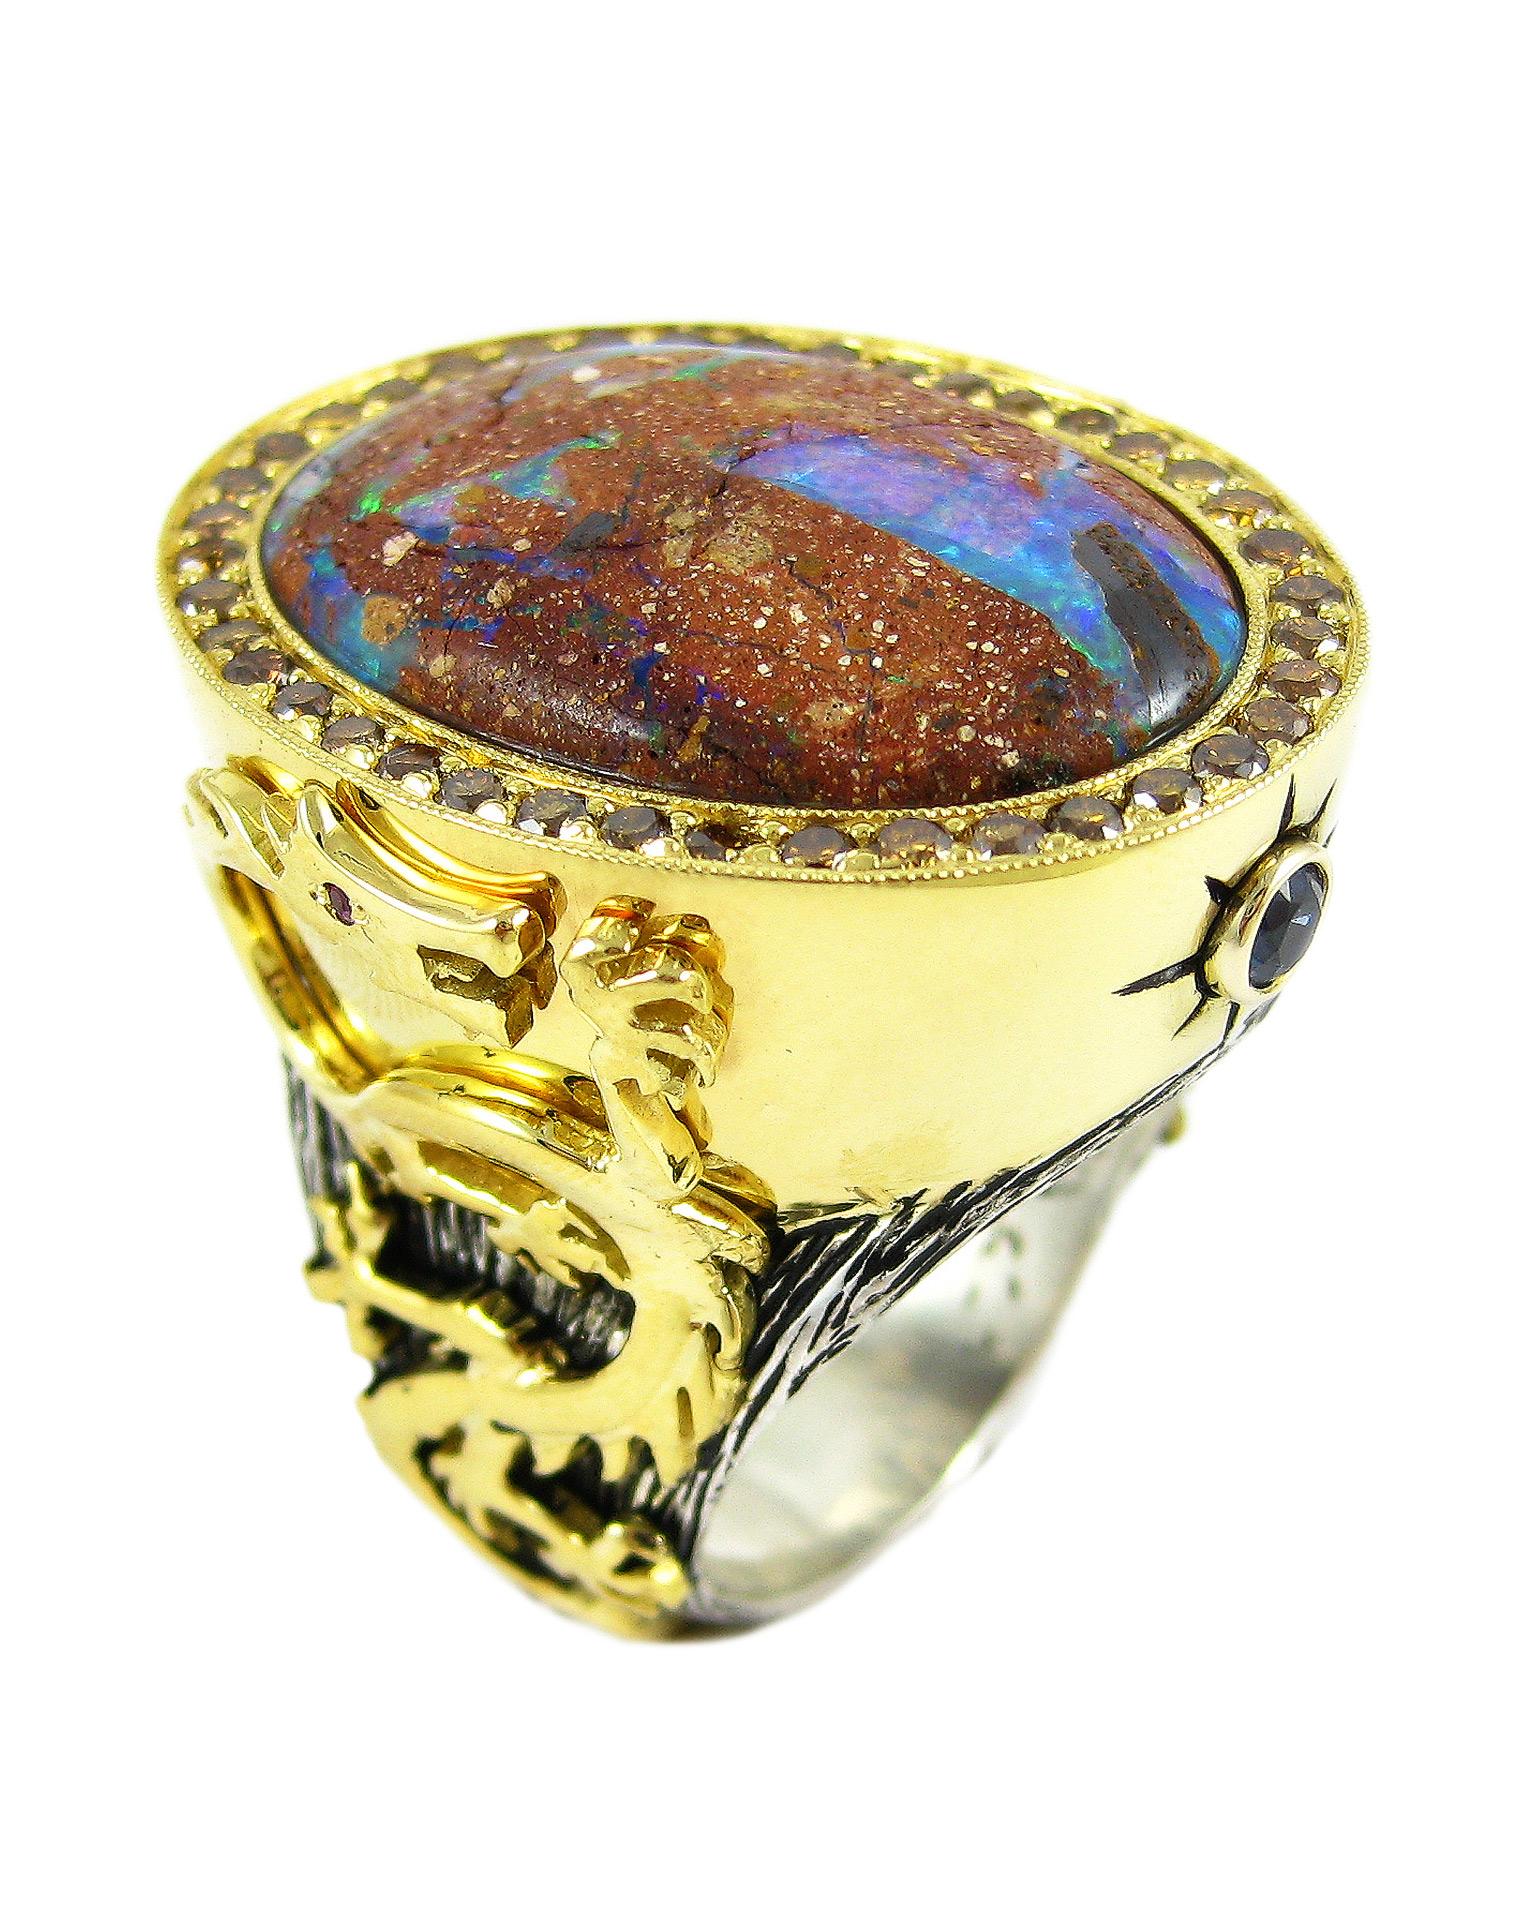 An opal is nature's painting of colors. And this opal ring in sterling silver with 18k yellow gold dragons with ruby eyes—1.03 carat total weight orange diamonds and .34 carat total weight sapphires—endures as wearable art. 

The Objects Organique